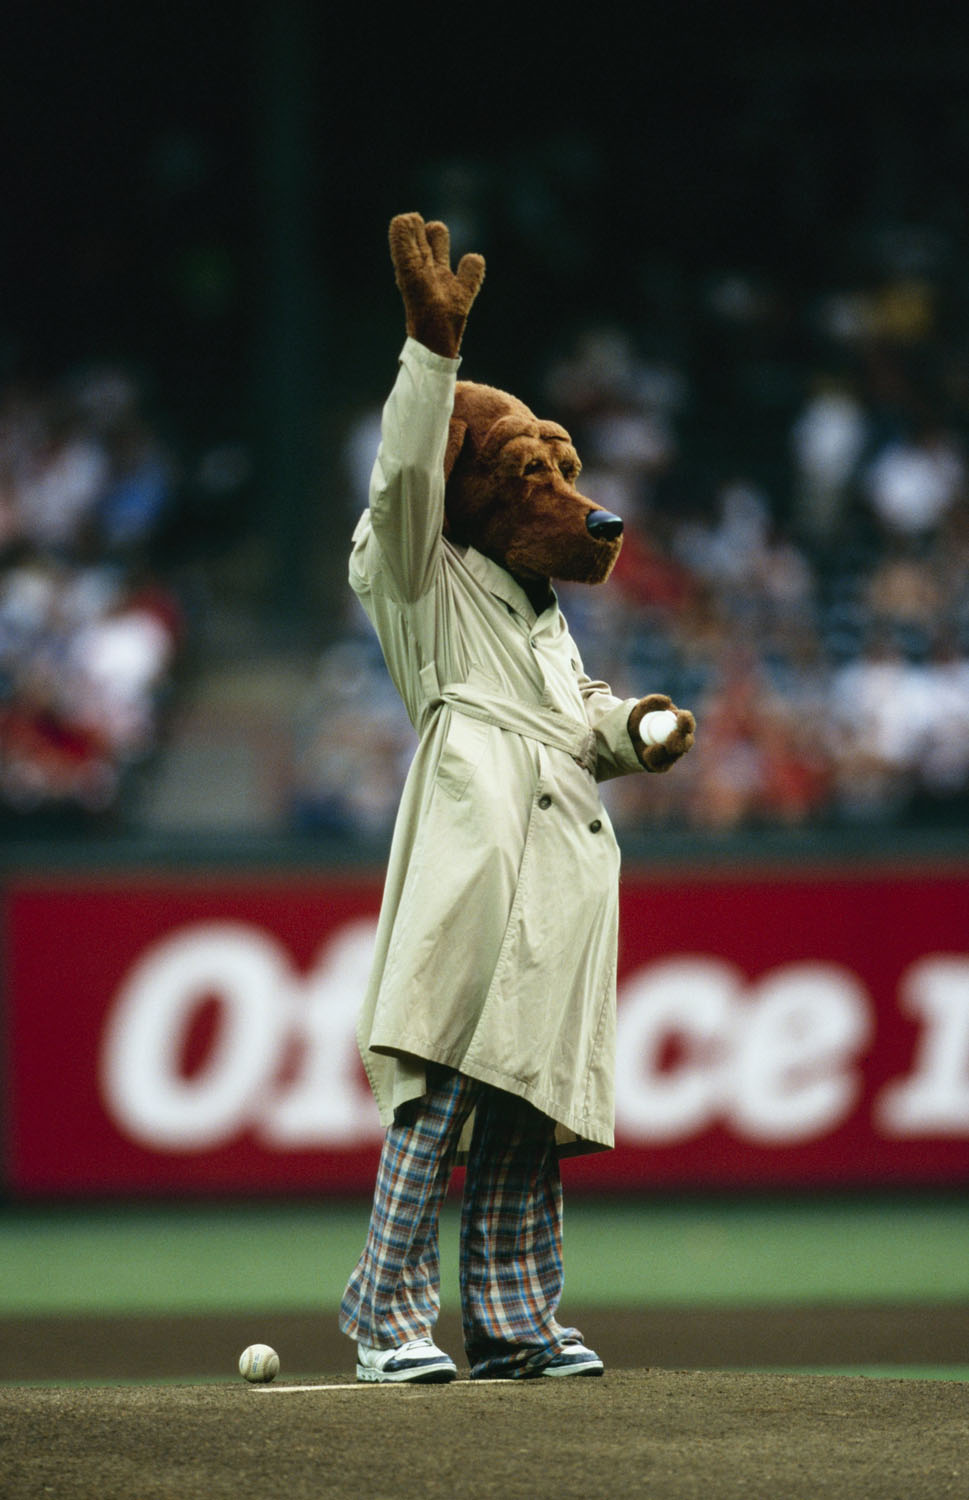 McGruff the Crime Dog throws out the first pitch before the Toronto Blue Jays game against the Texas Rangers at The Ballpark in Arlington on August 4, 1998 in Arlington, Texas. (Stephen Dunn&mdash;Getty Images)